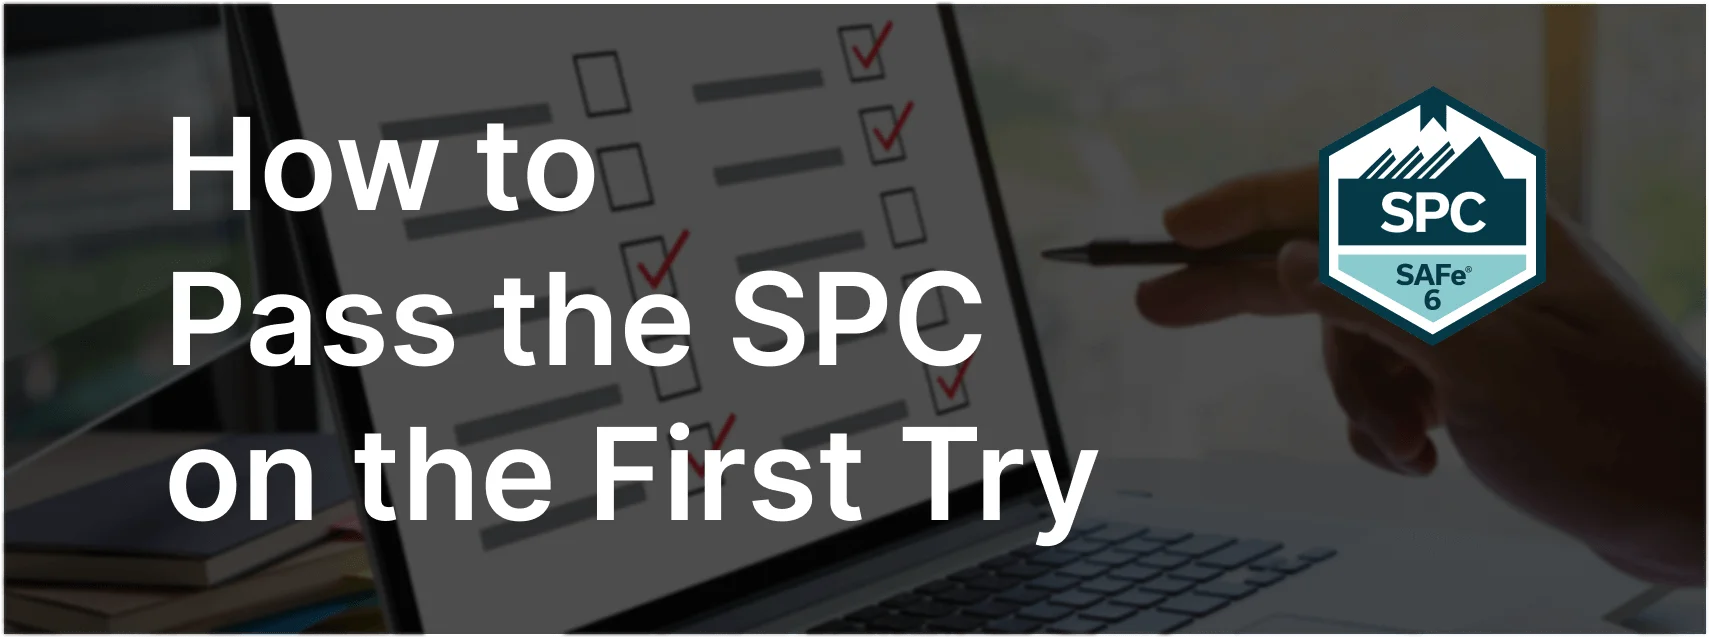 How To Pass SPC Exam on the First Try